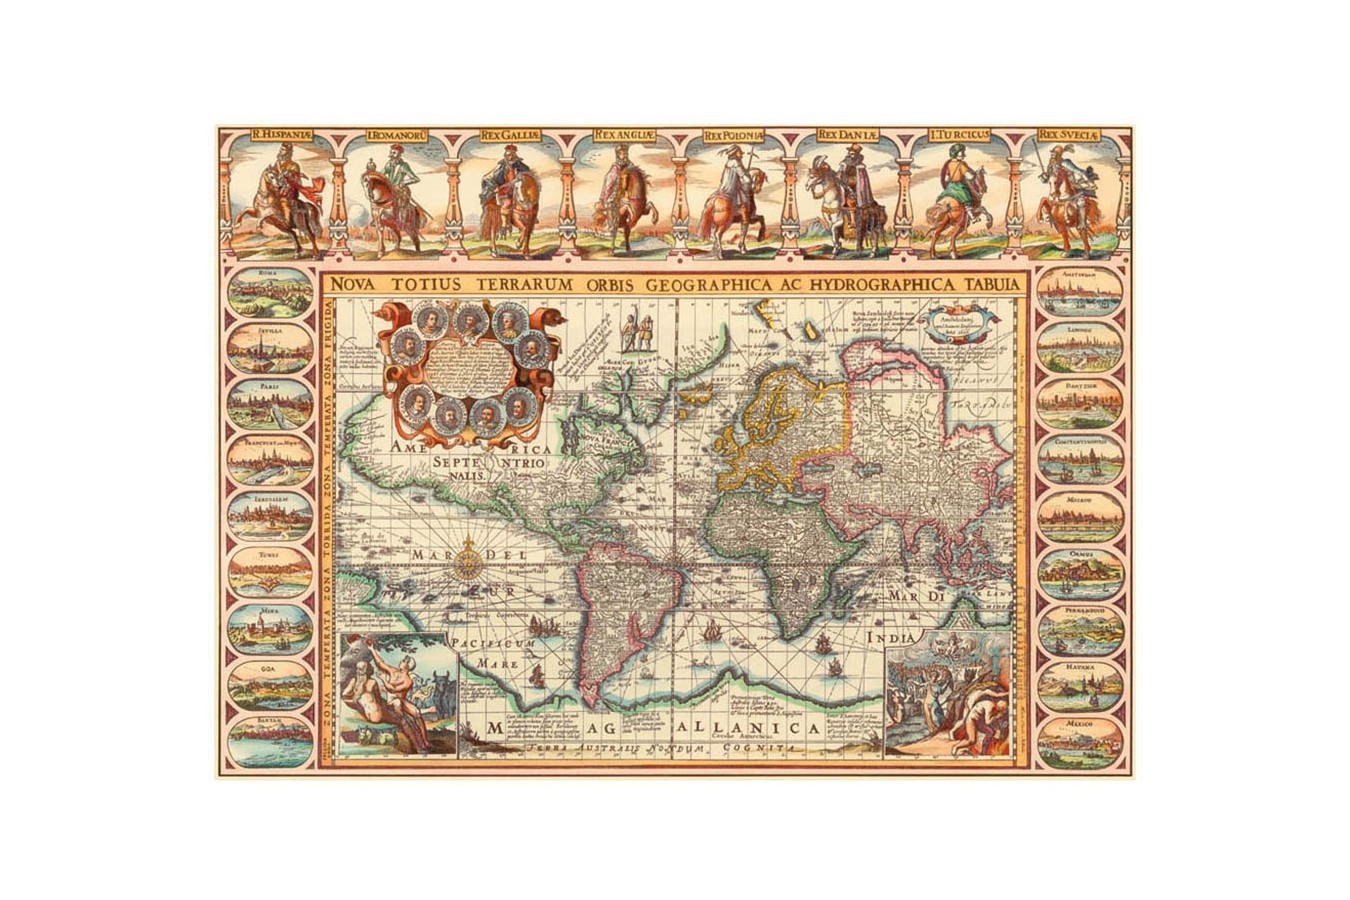 Puzzle Dino - Antique World Map, 2000 piese (65158)